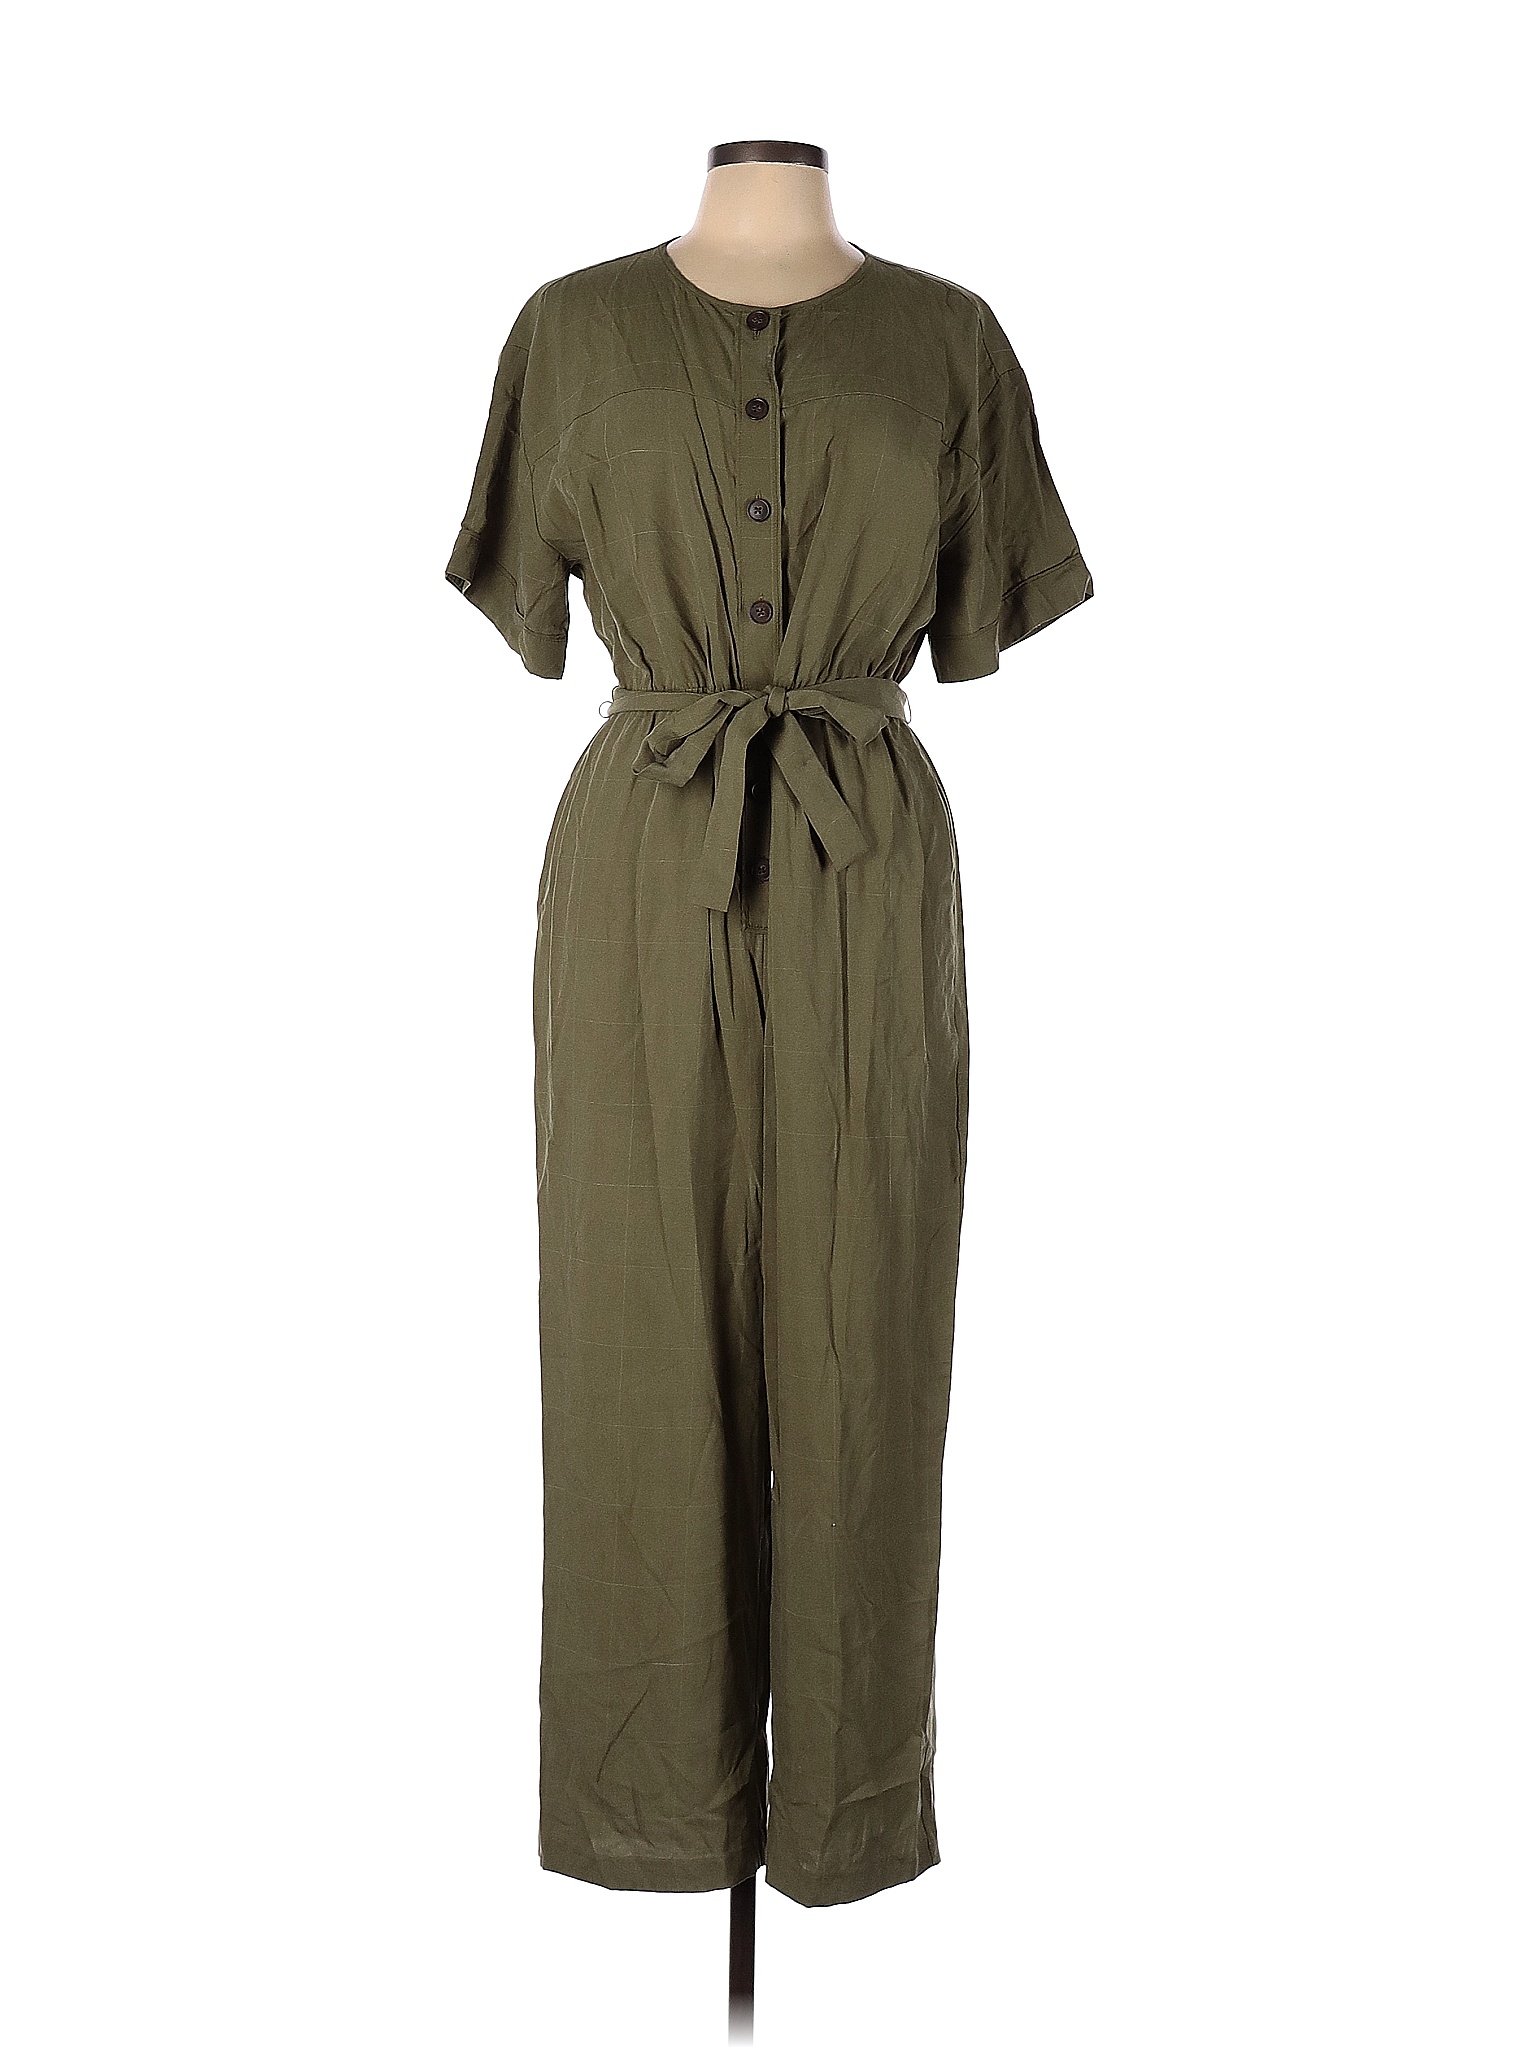 Madewell Solid Colored Green Jumpsuit Size L - 53% off | thredUP